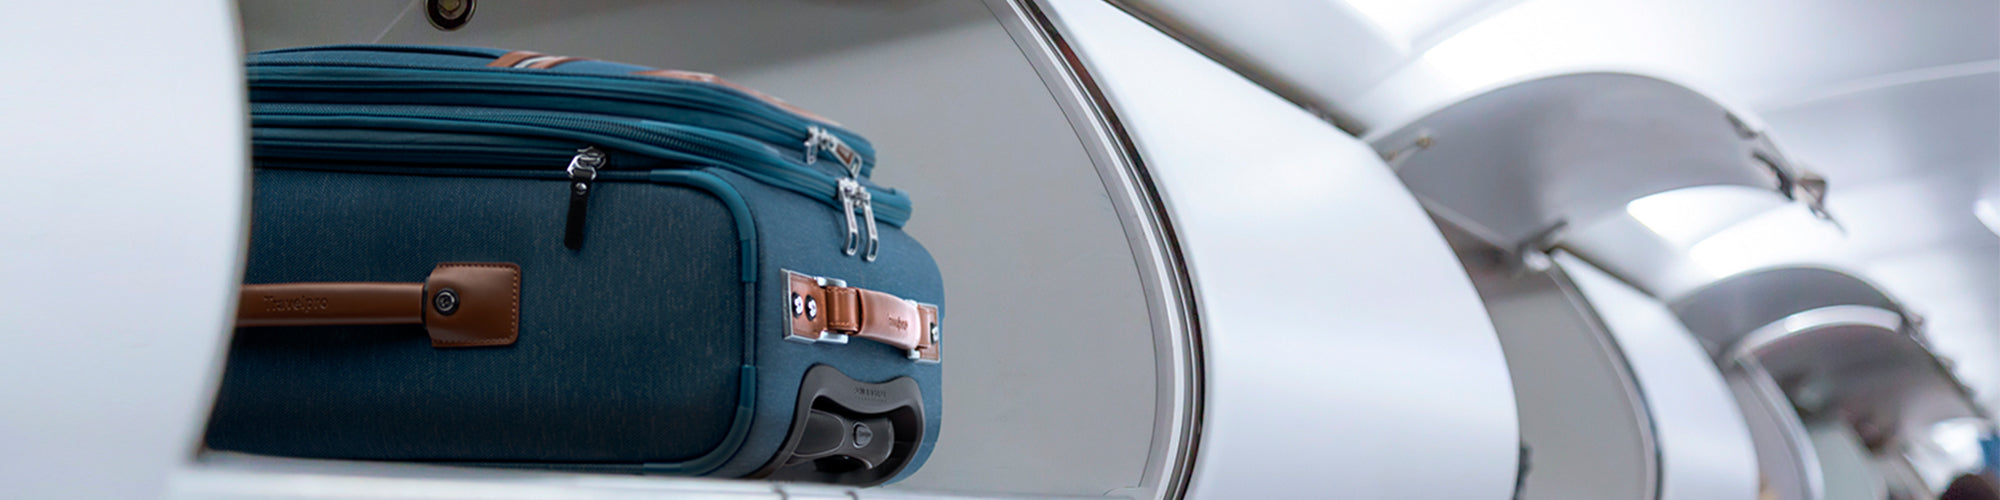 Travelpro carry-on luggage size is the perfect for the overhead compartment of most airplanes.